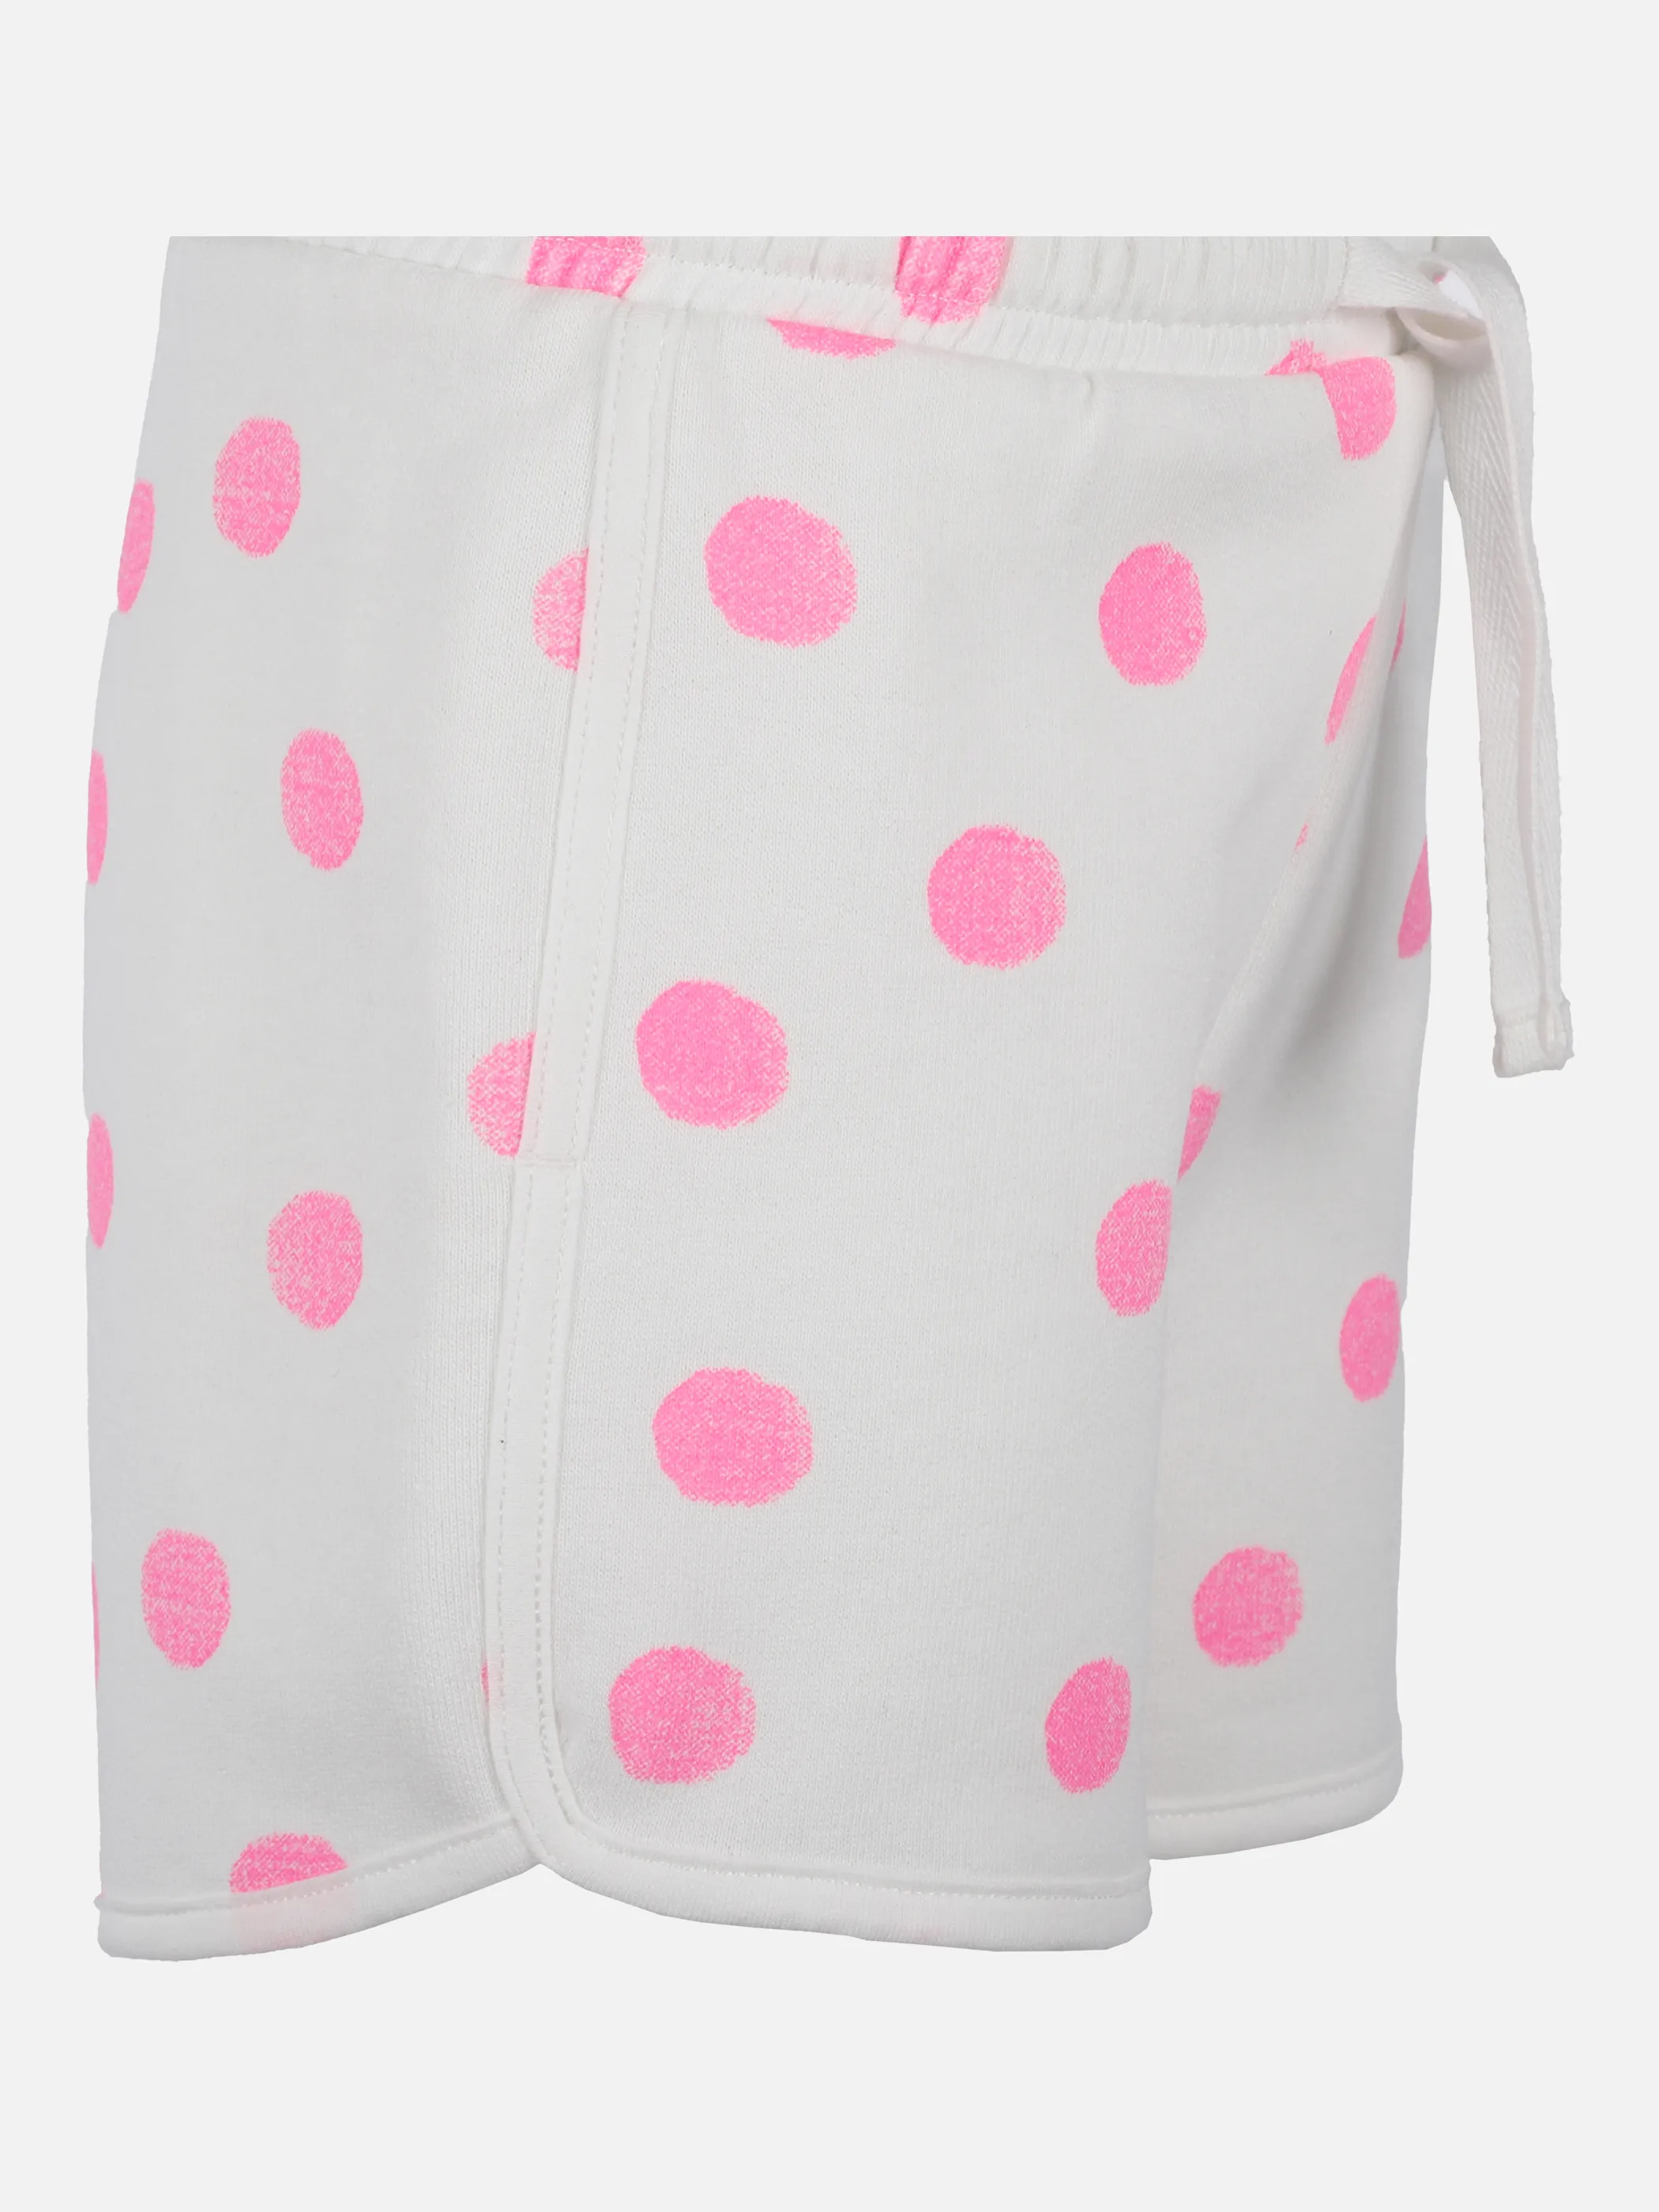 Tom Tailor 1031924 jersey shorts Pink 865852 29921 3